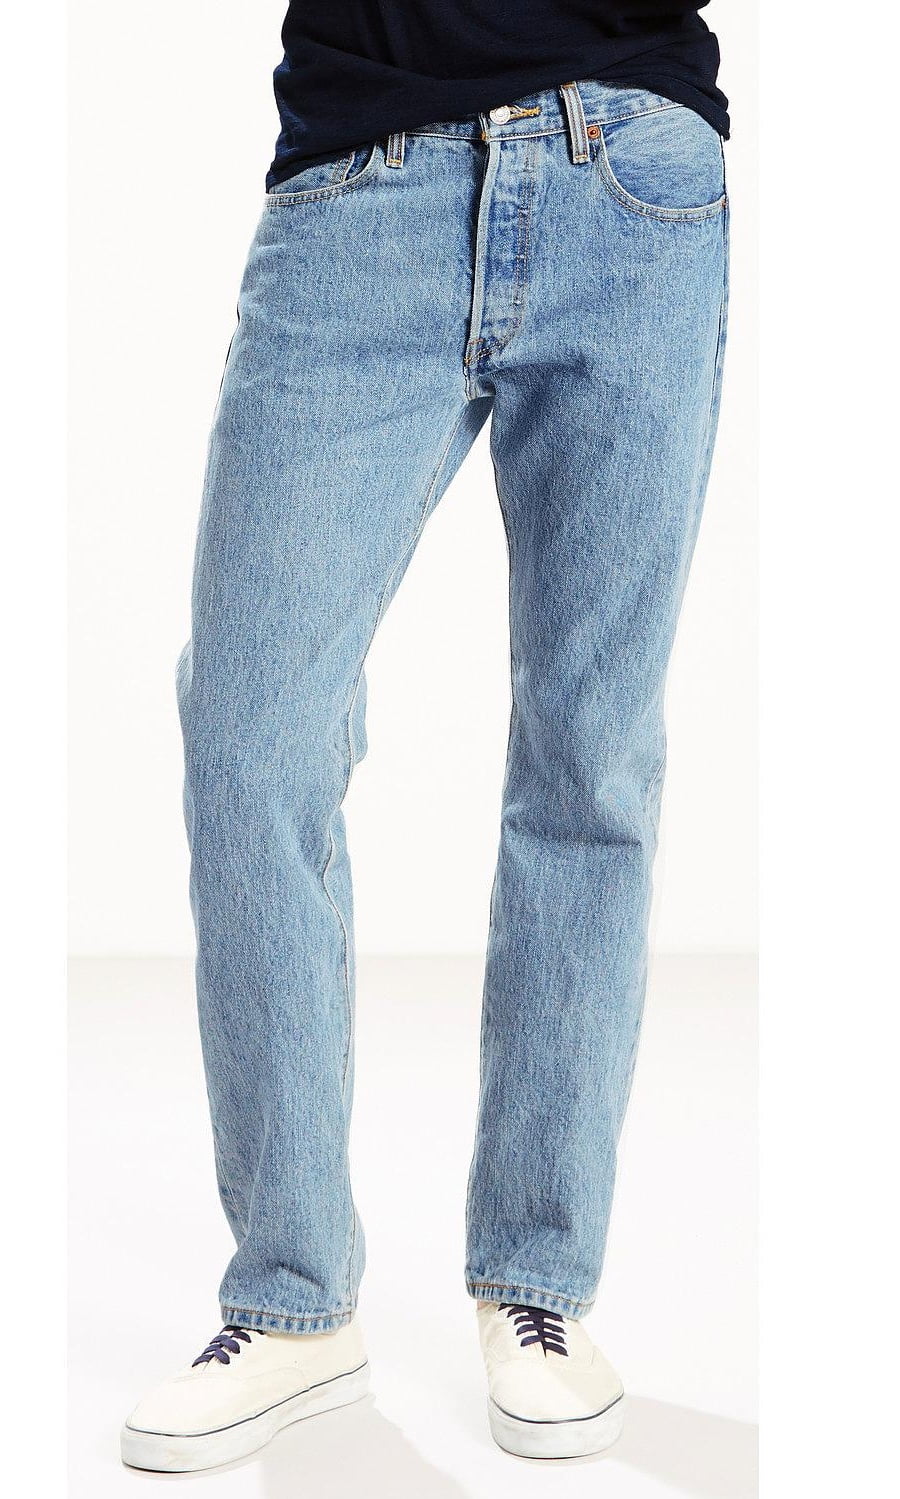 Levi's Men's 505 Regular Fit Jeans (Also Available in Big & Tall), Dark  Stonewash, 29W x 30L at  Men's Clothing store